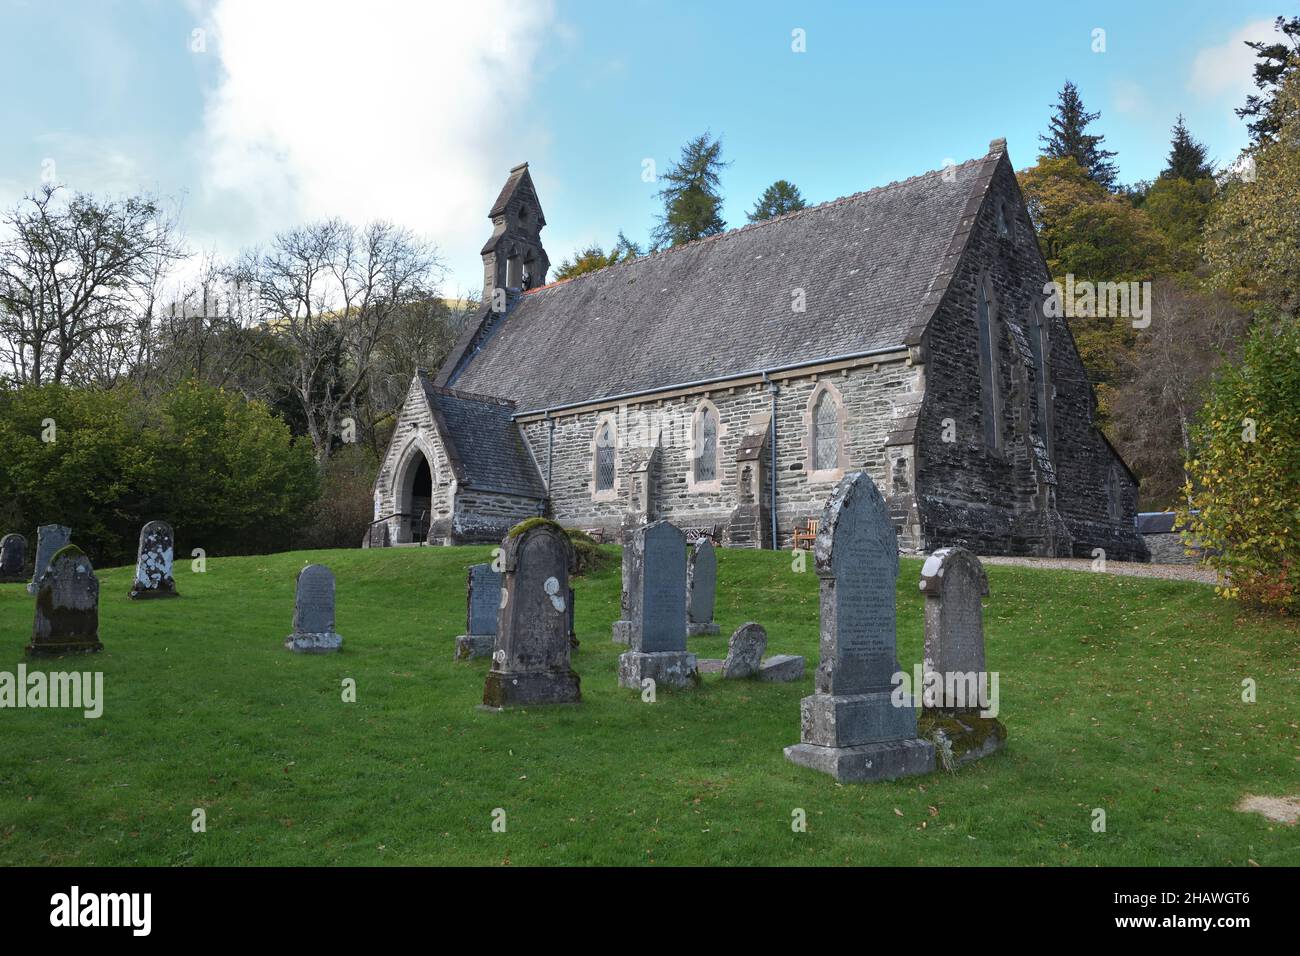 Balquhidder Parish Church and disputed burial ground of the outlaw Rob Roy MacGregor of Scotland, UK. Christian church in Lochearnhead. Stock Photo